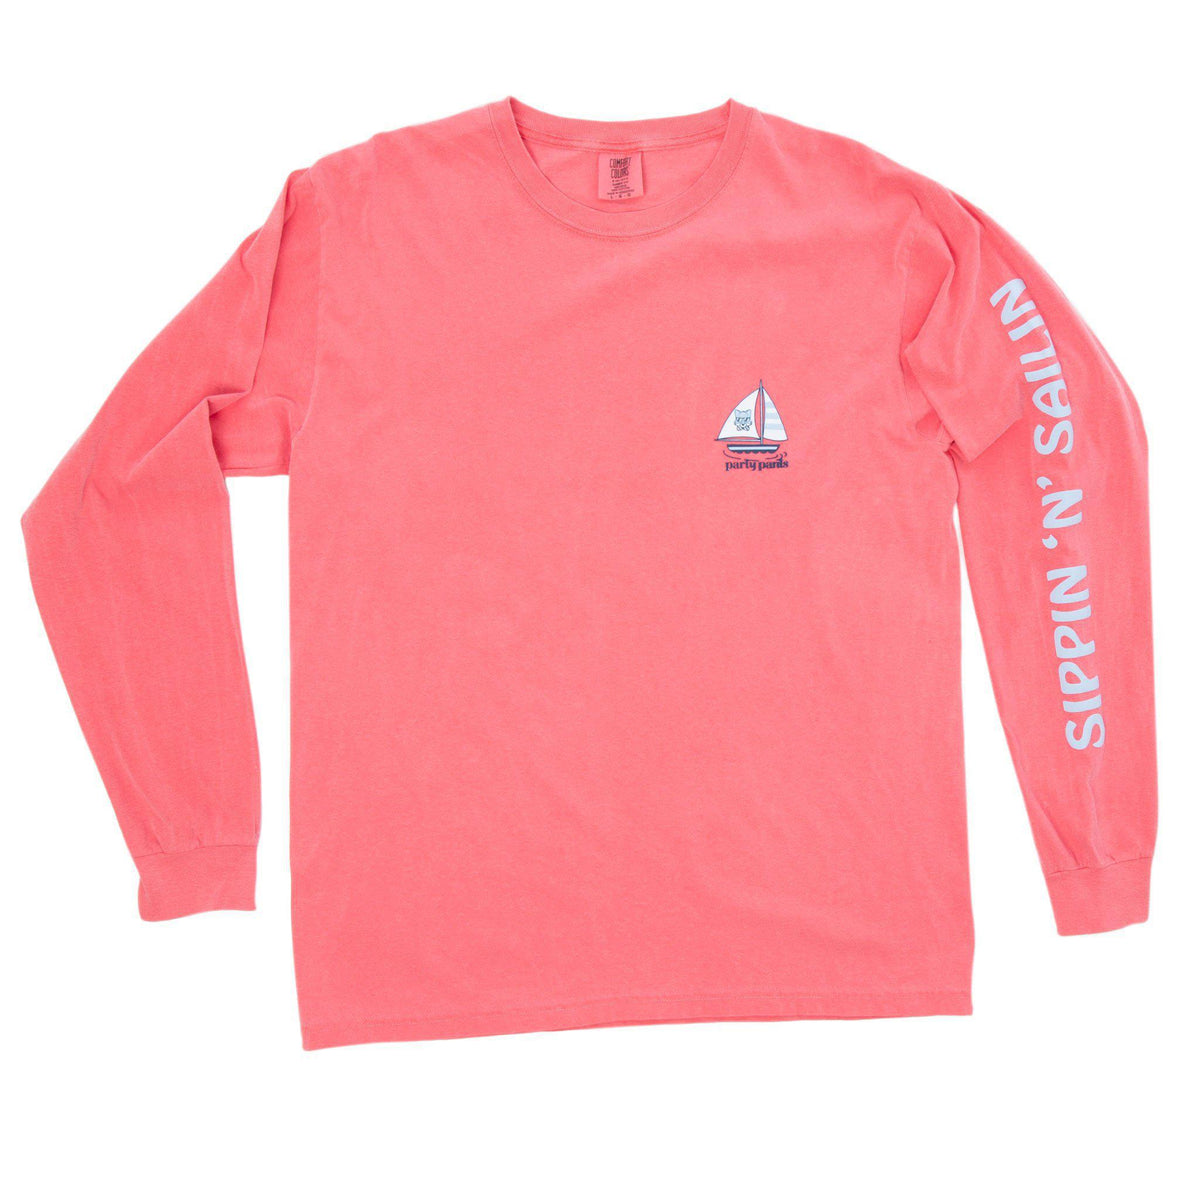 PARTY PANTS SIPPIN LONG SLEEVE TEE